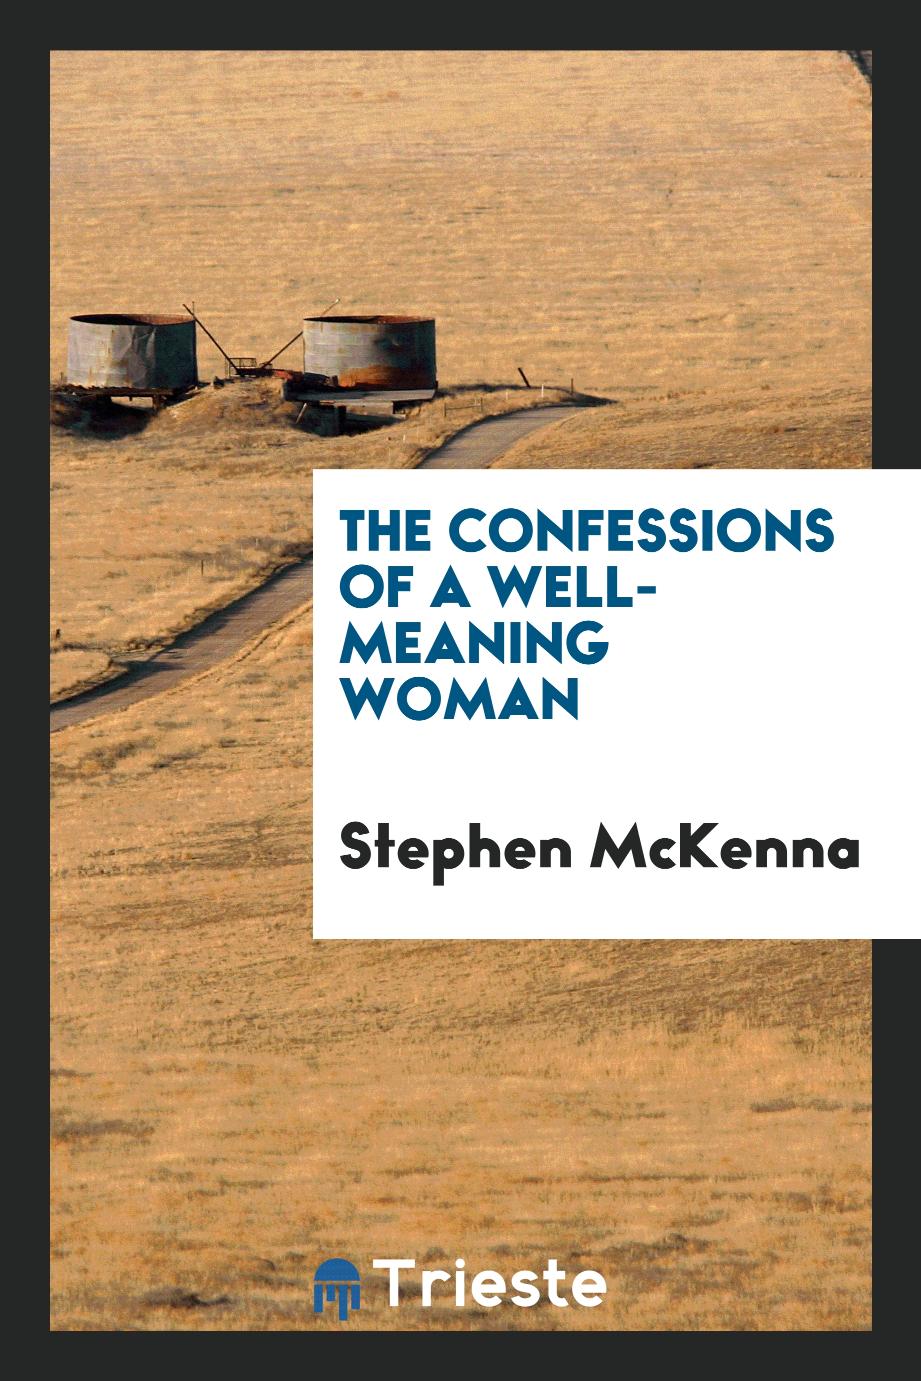 The Confessions of a Well-Meaning Woman